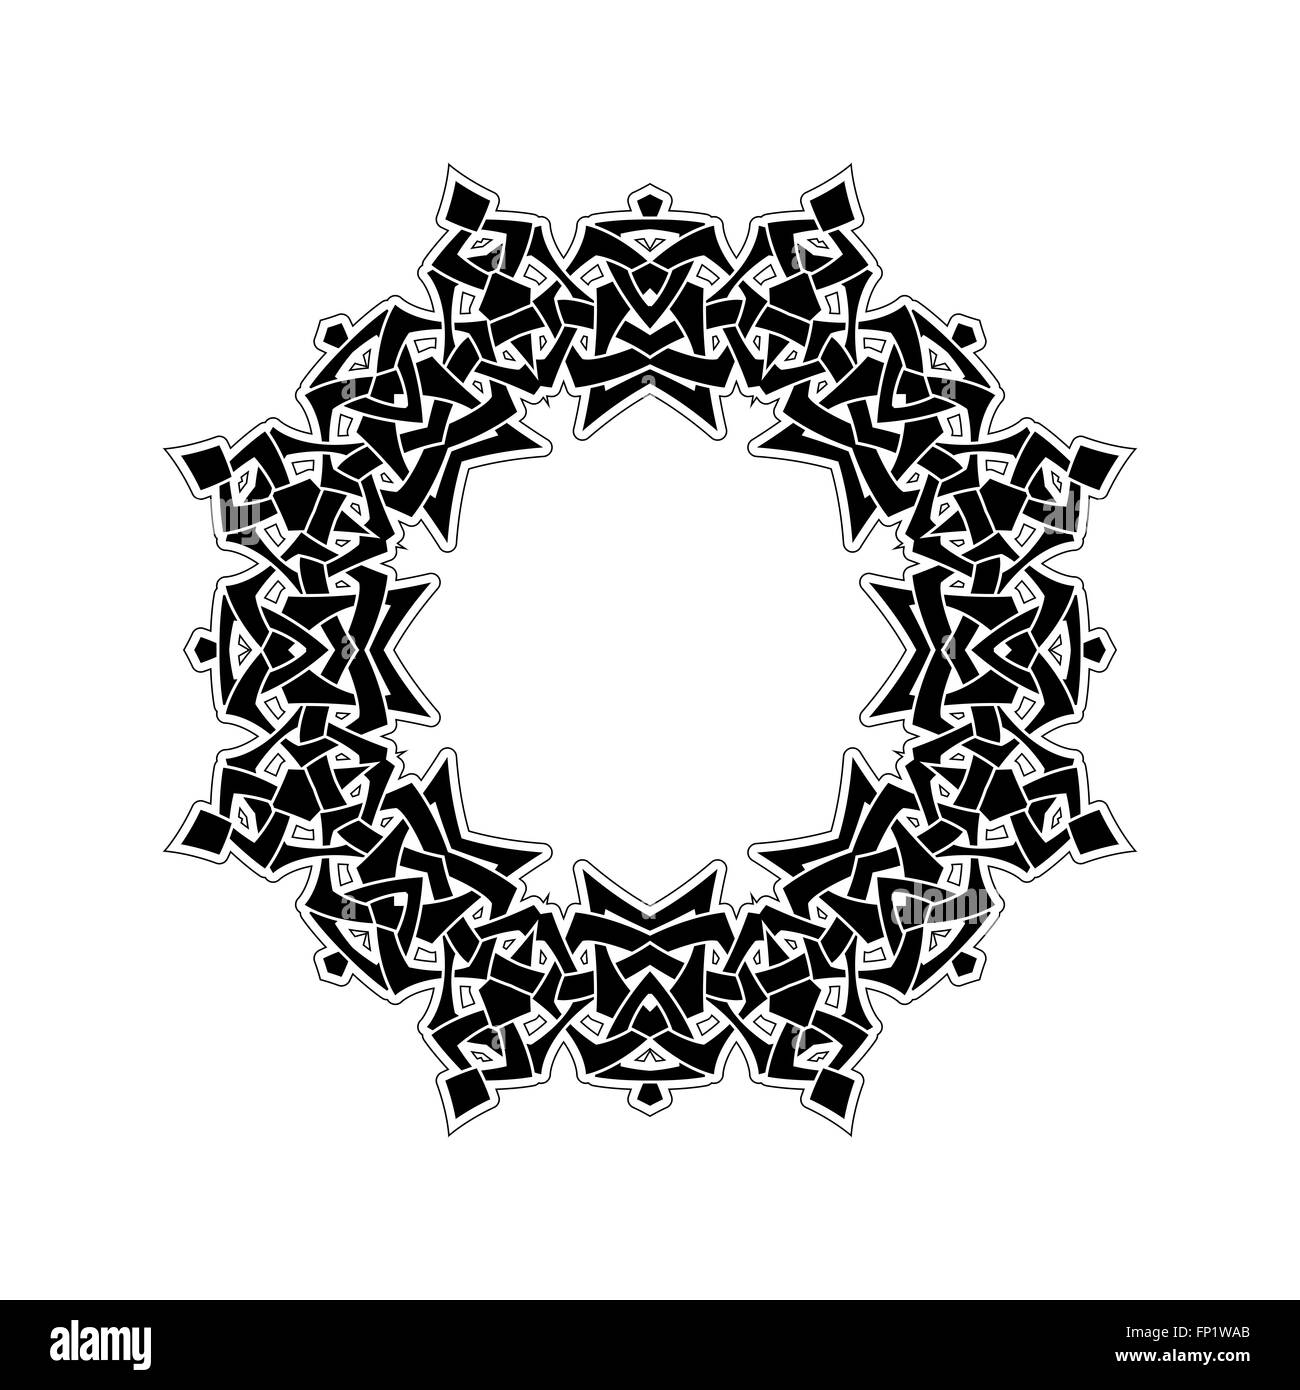 Ornate border. Gothic lace tattoo. Celtic weave with sharp corners. Stock Photo